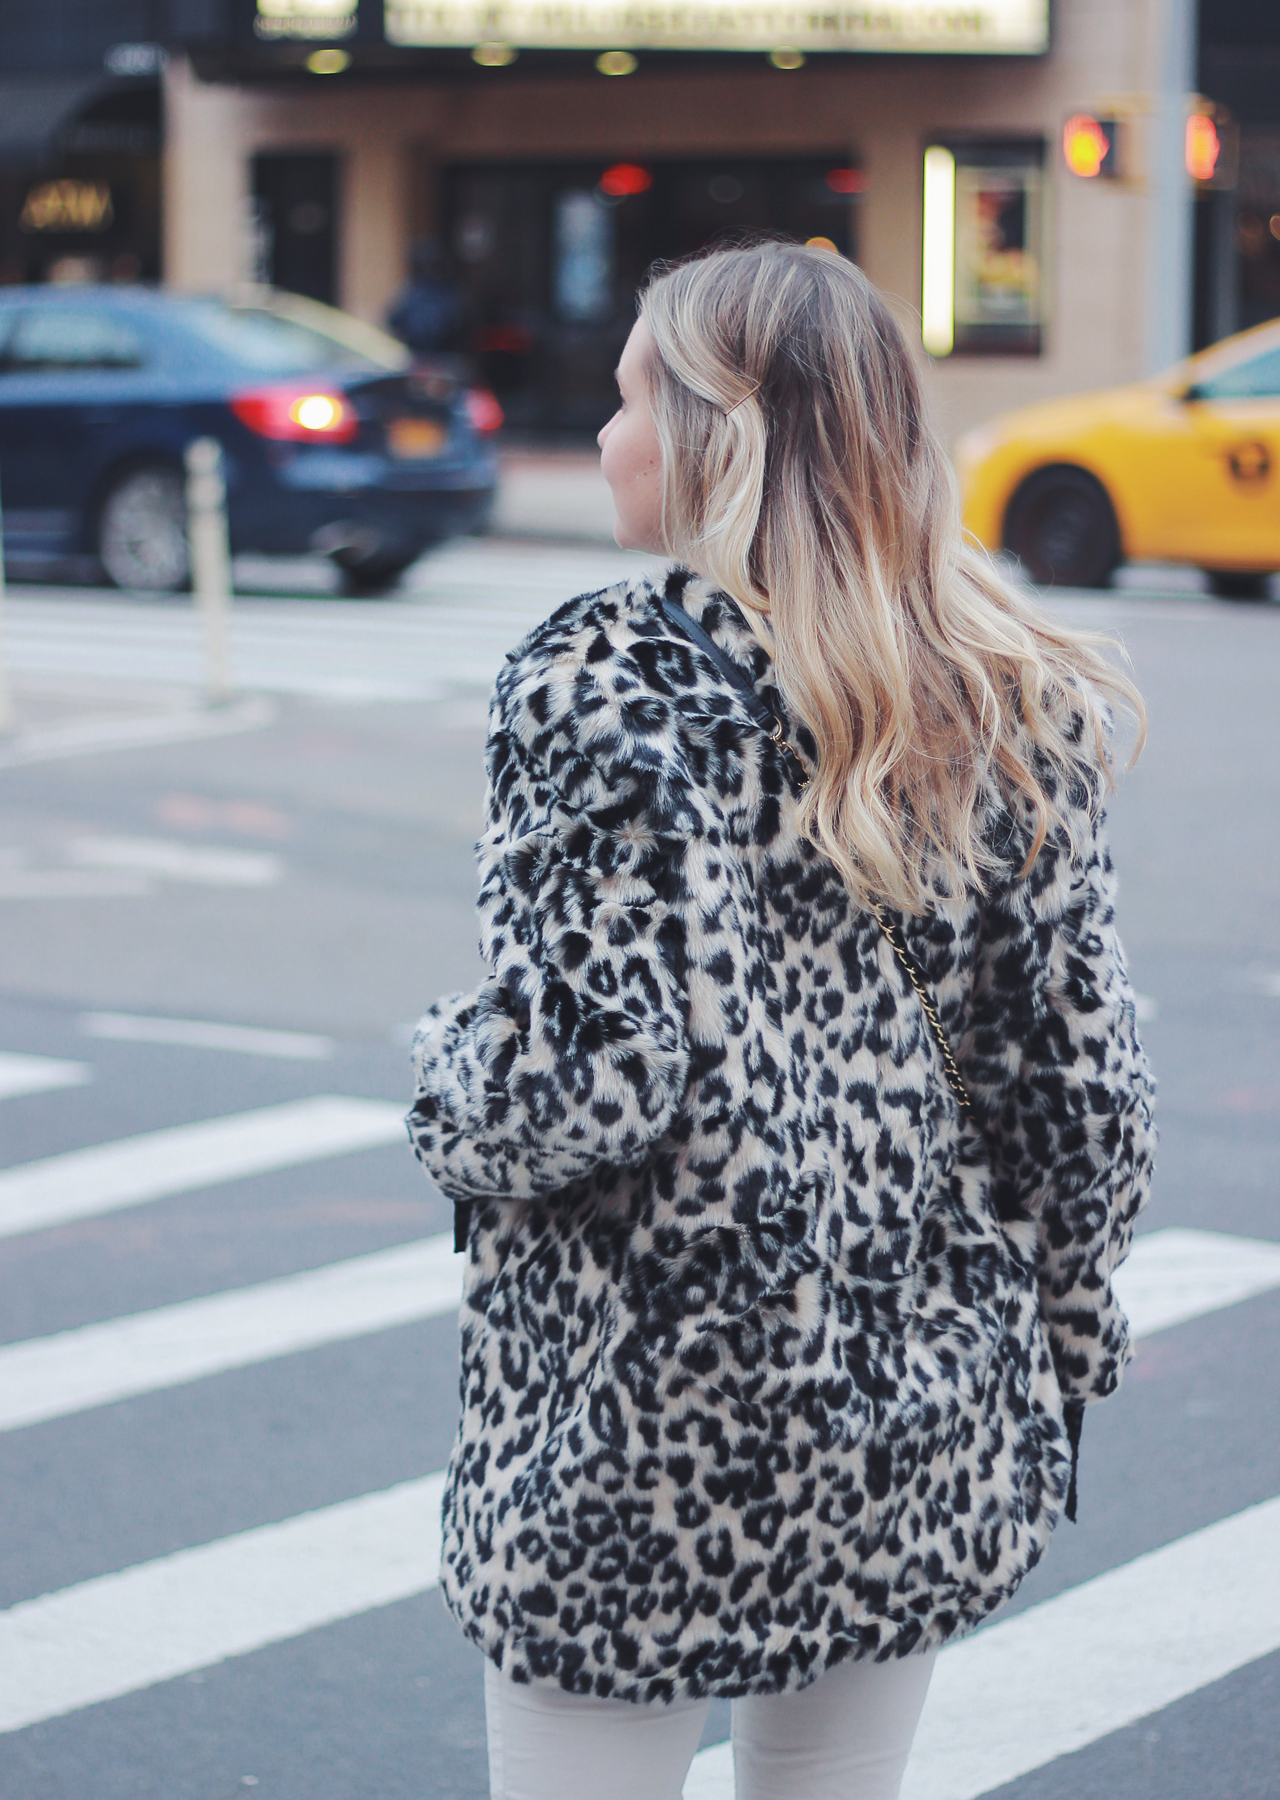 Winter Date Ideas in NYC - What to Wear and Where to Go